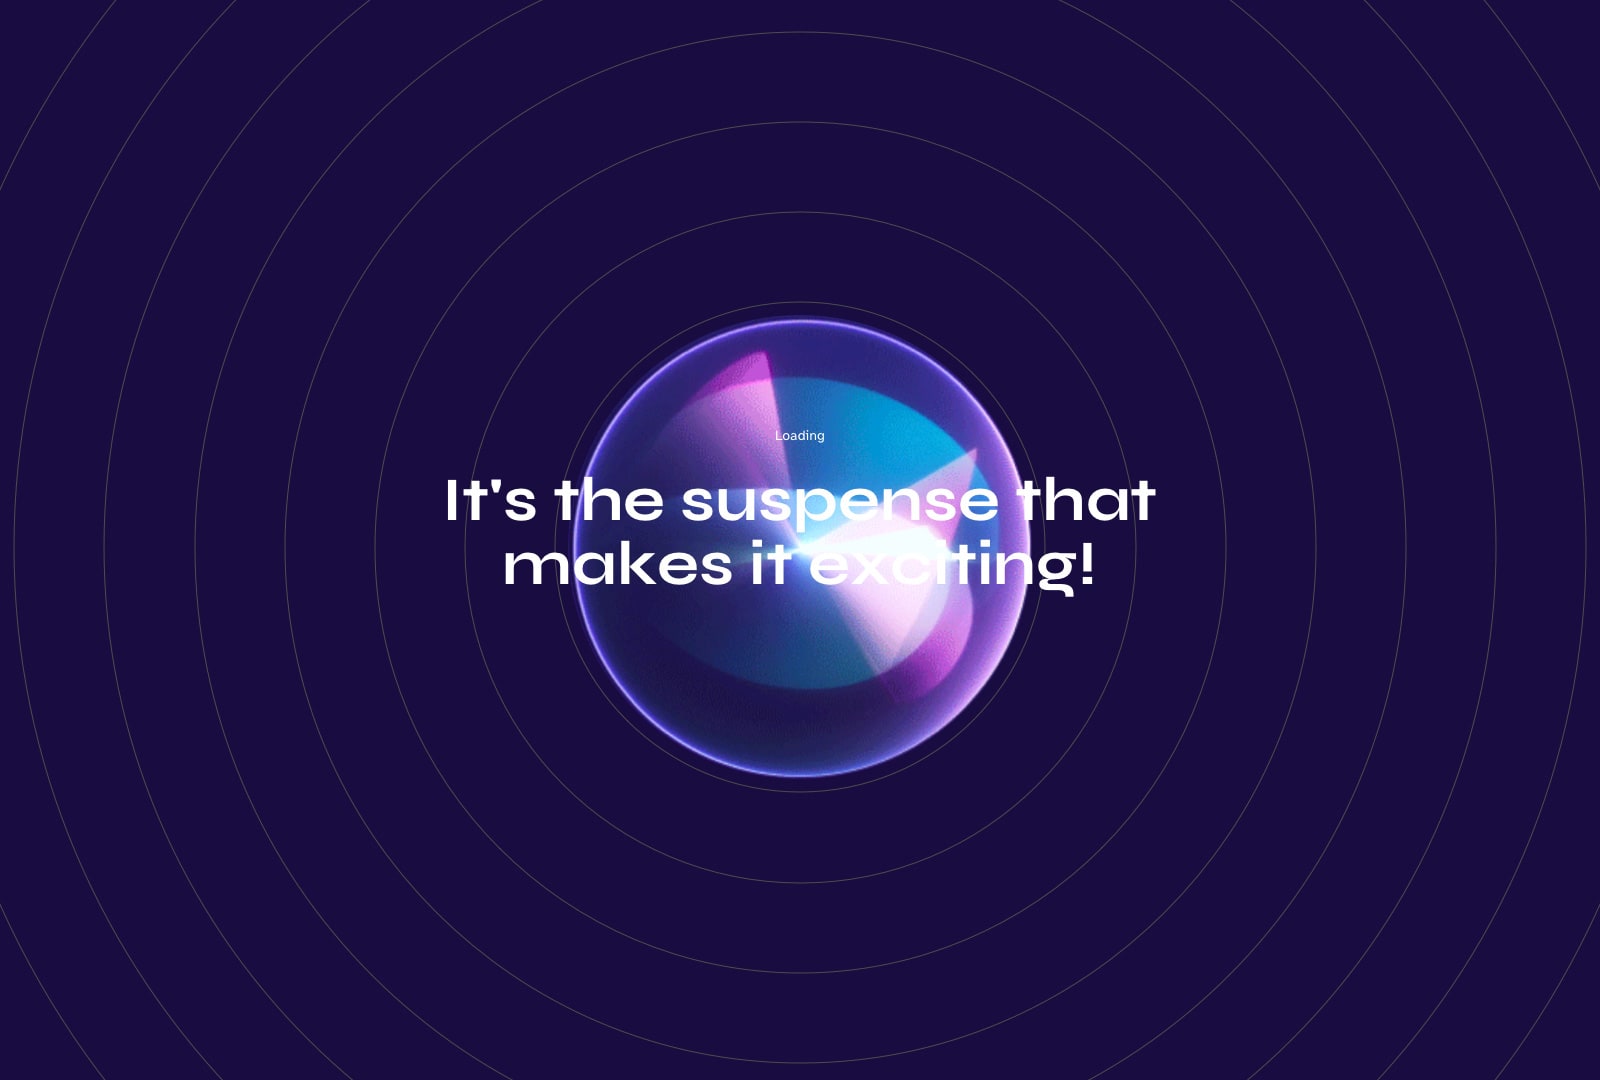 A purple orb with the the text "It's the suspense that makes it exciting" on a deep purple background